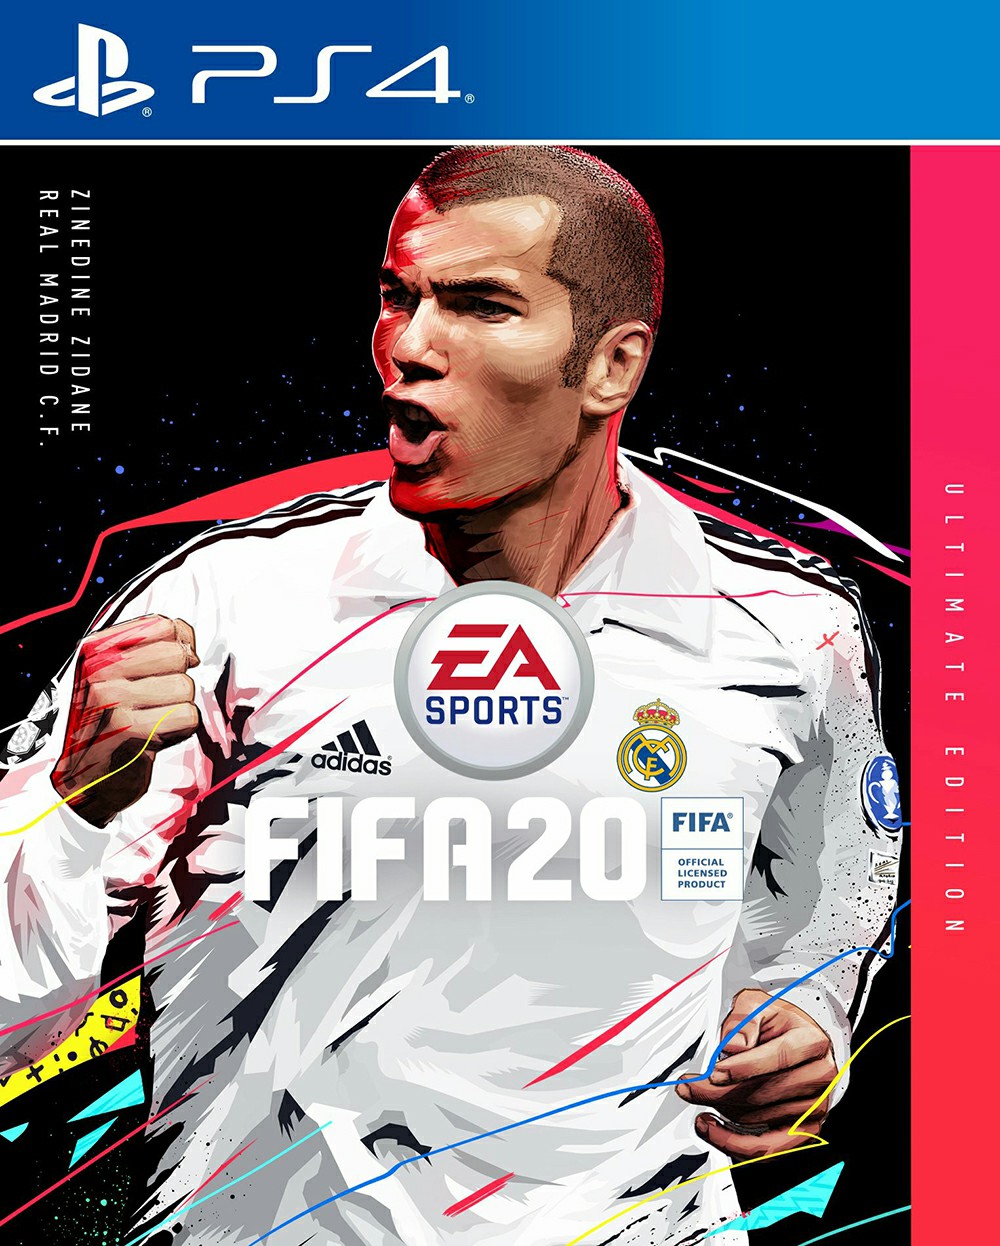 Zinédine Zidane is FIFA 20 Ultimate Edition Cover Star